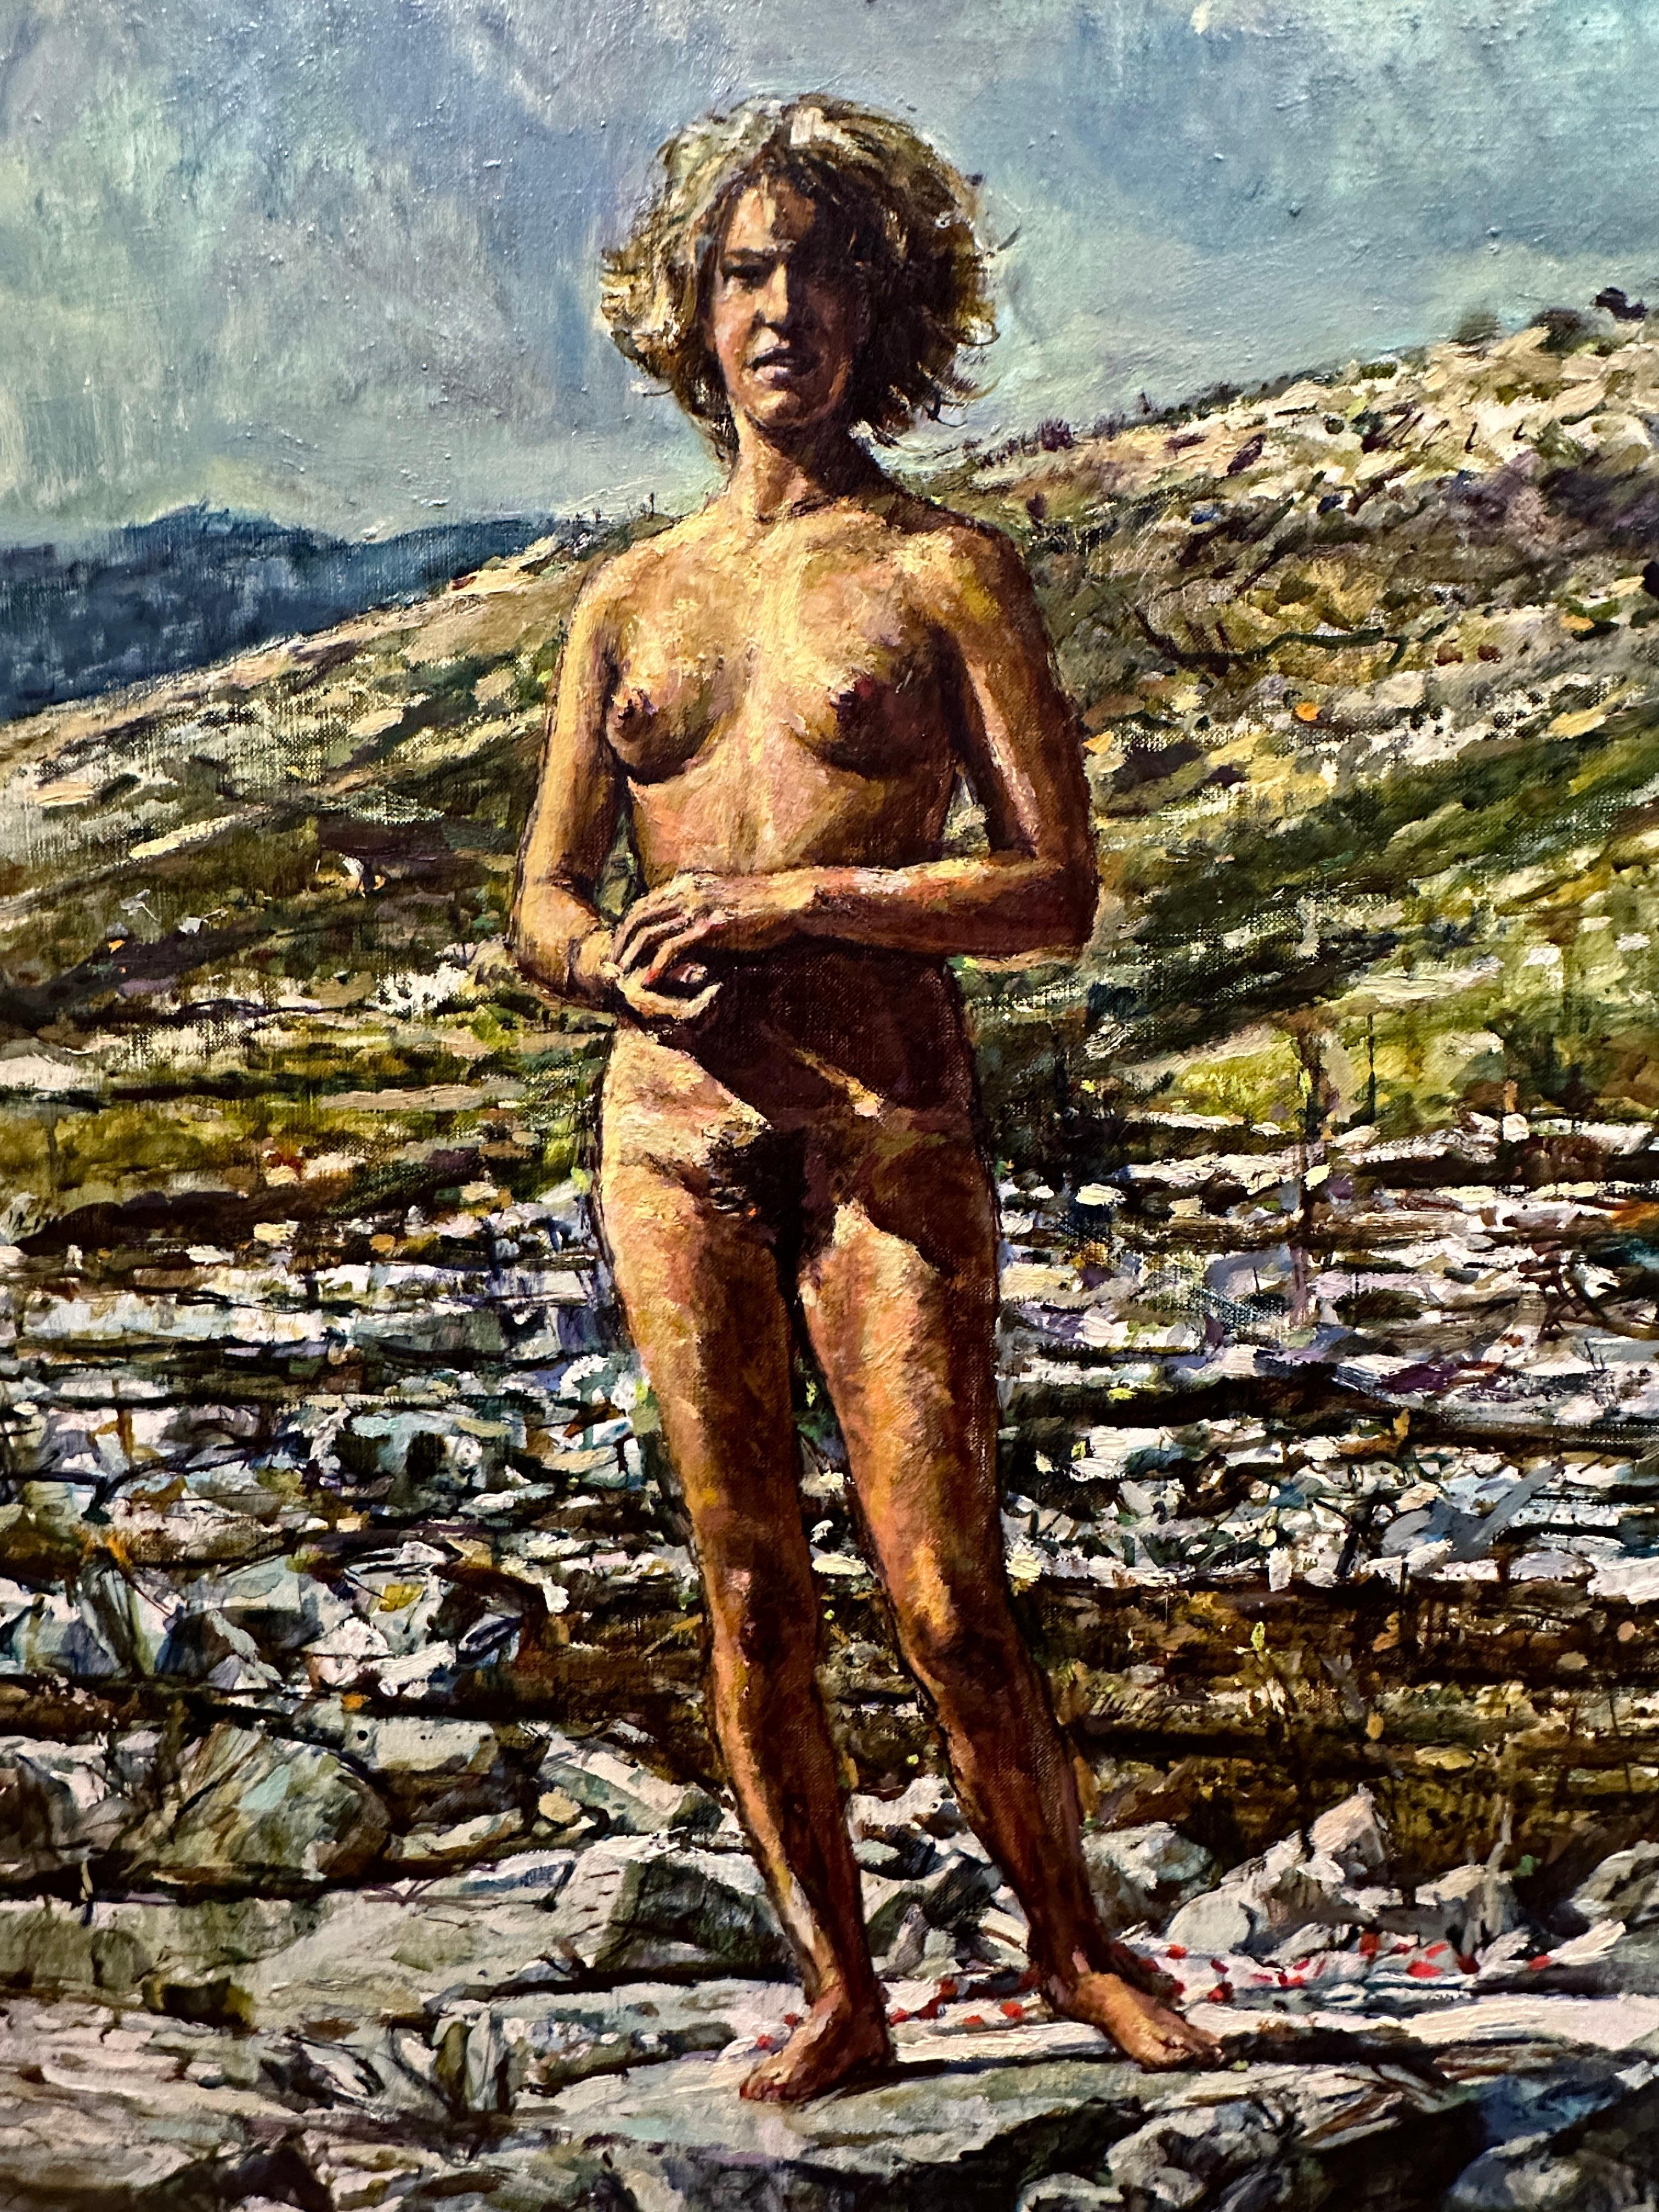 Nude Free Woman in a Rocky Mountain Landscape - Barbizon School Painting by Unknown